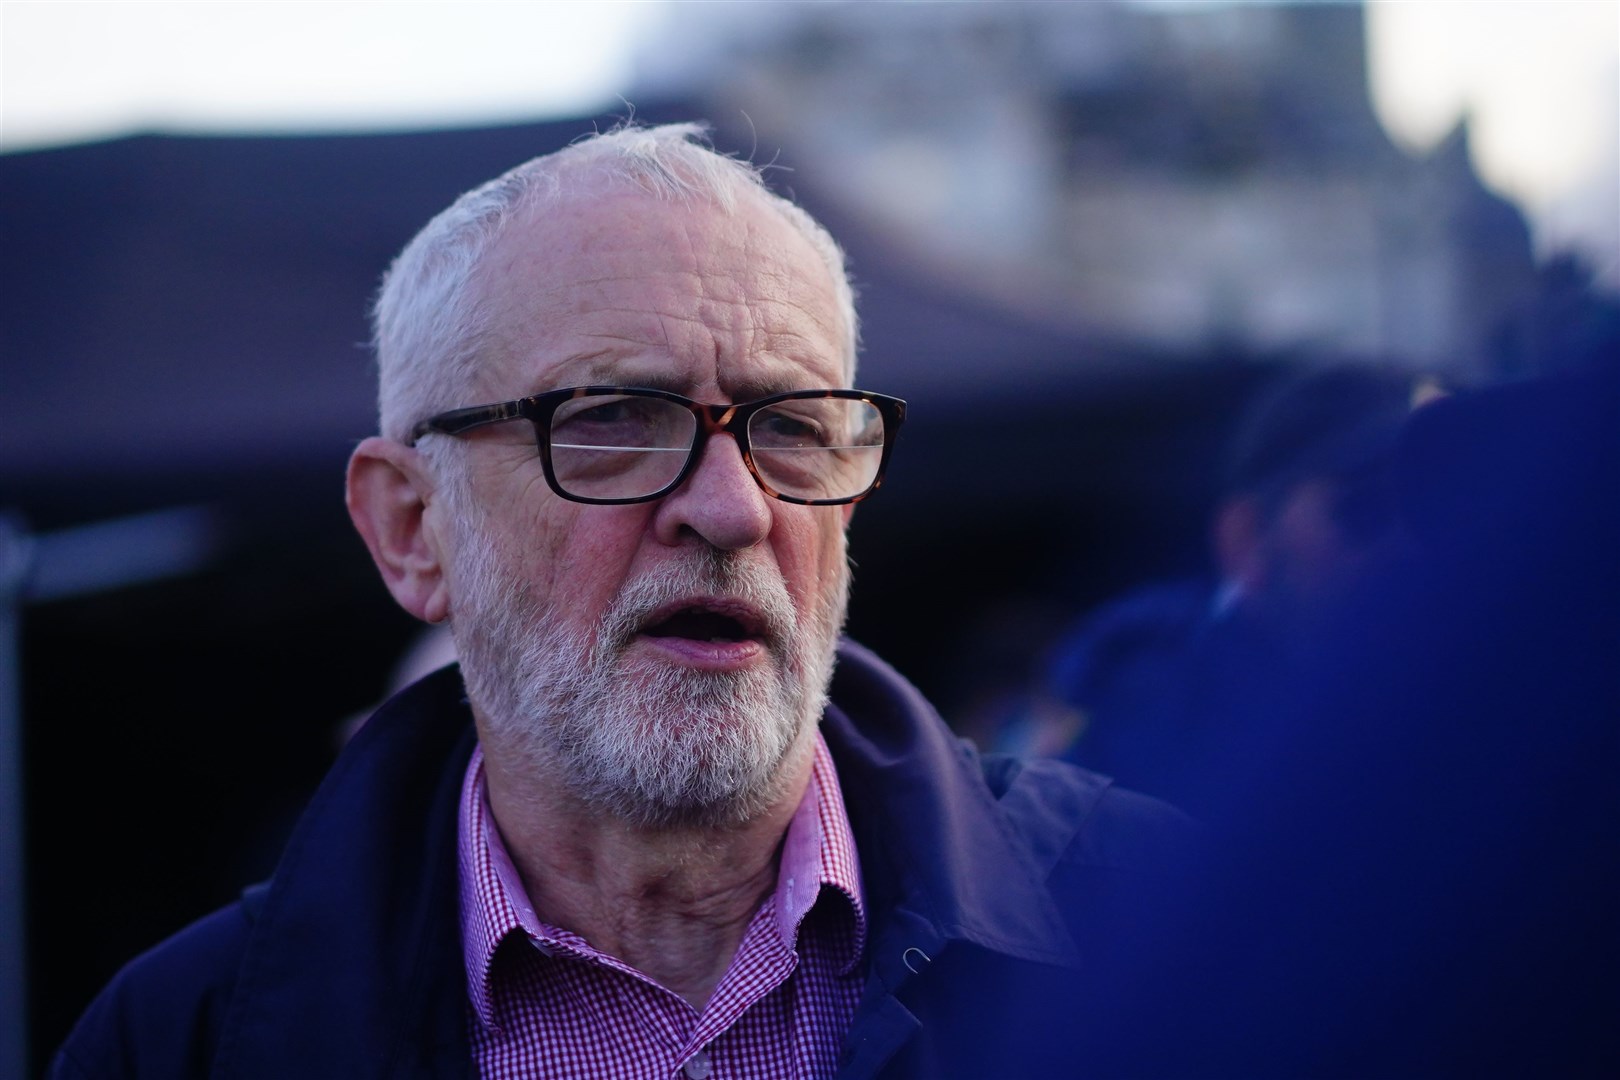 Jeremy Corbyn said he would refuse to press the nuclear button (Victoria Jones/PA)